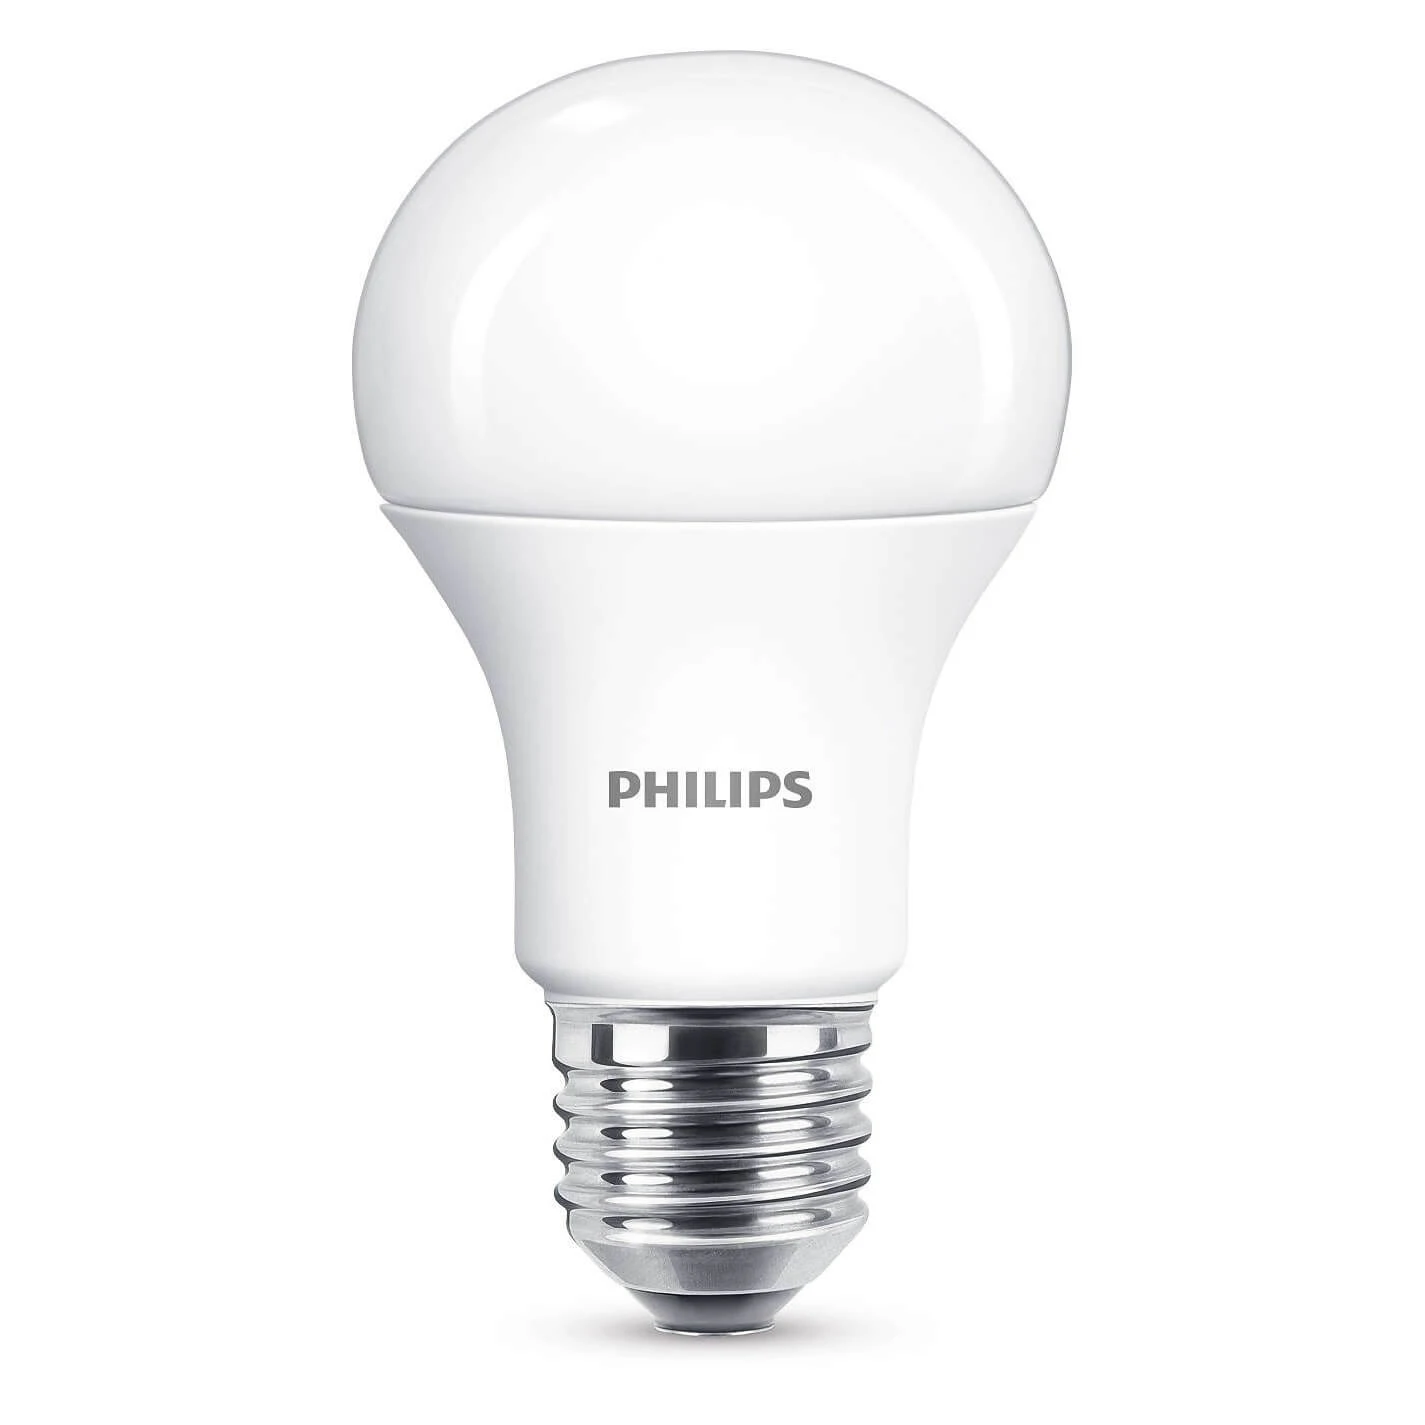 The best bulb for any lamp – LED, halogen bulbs. Get them online